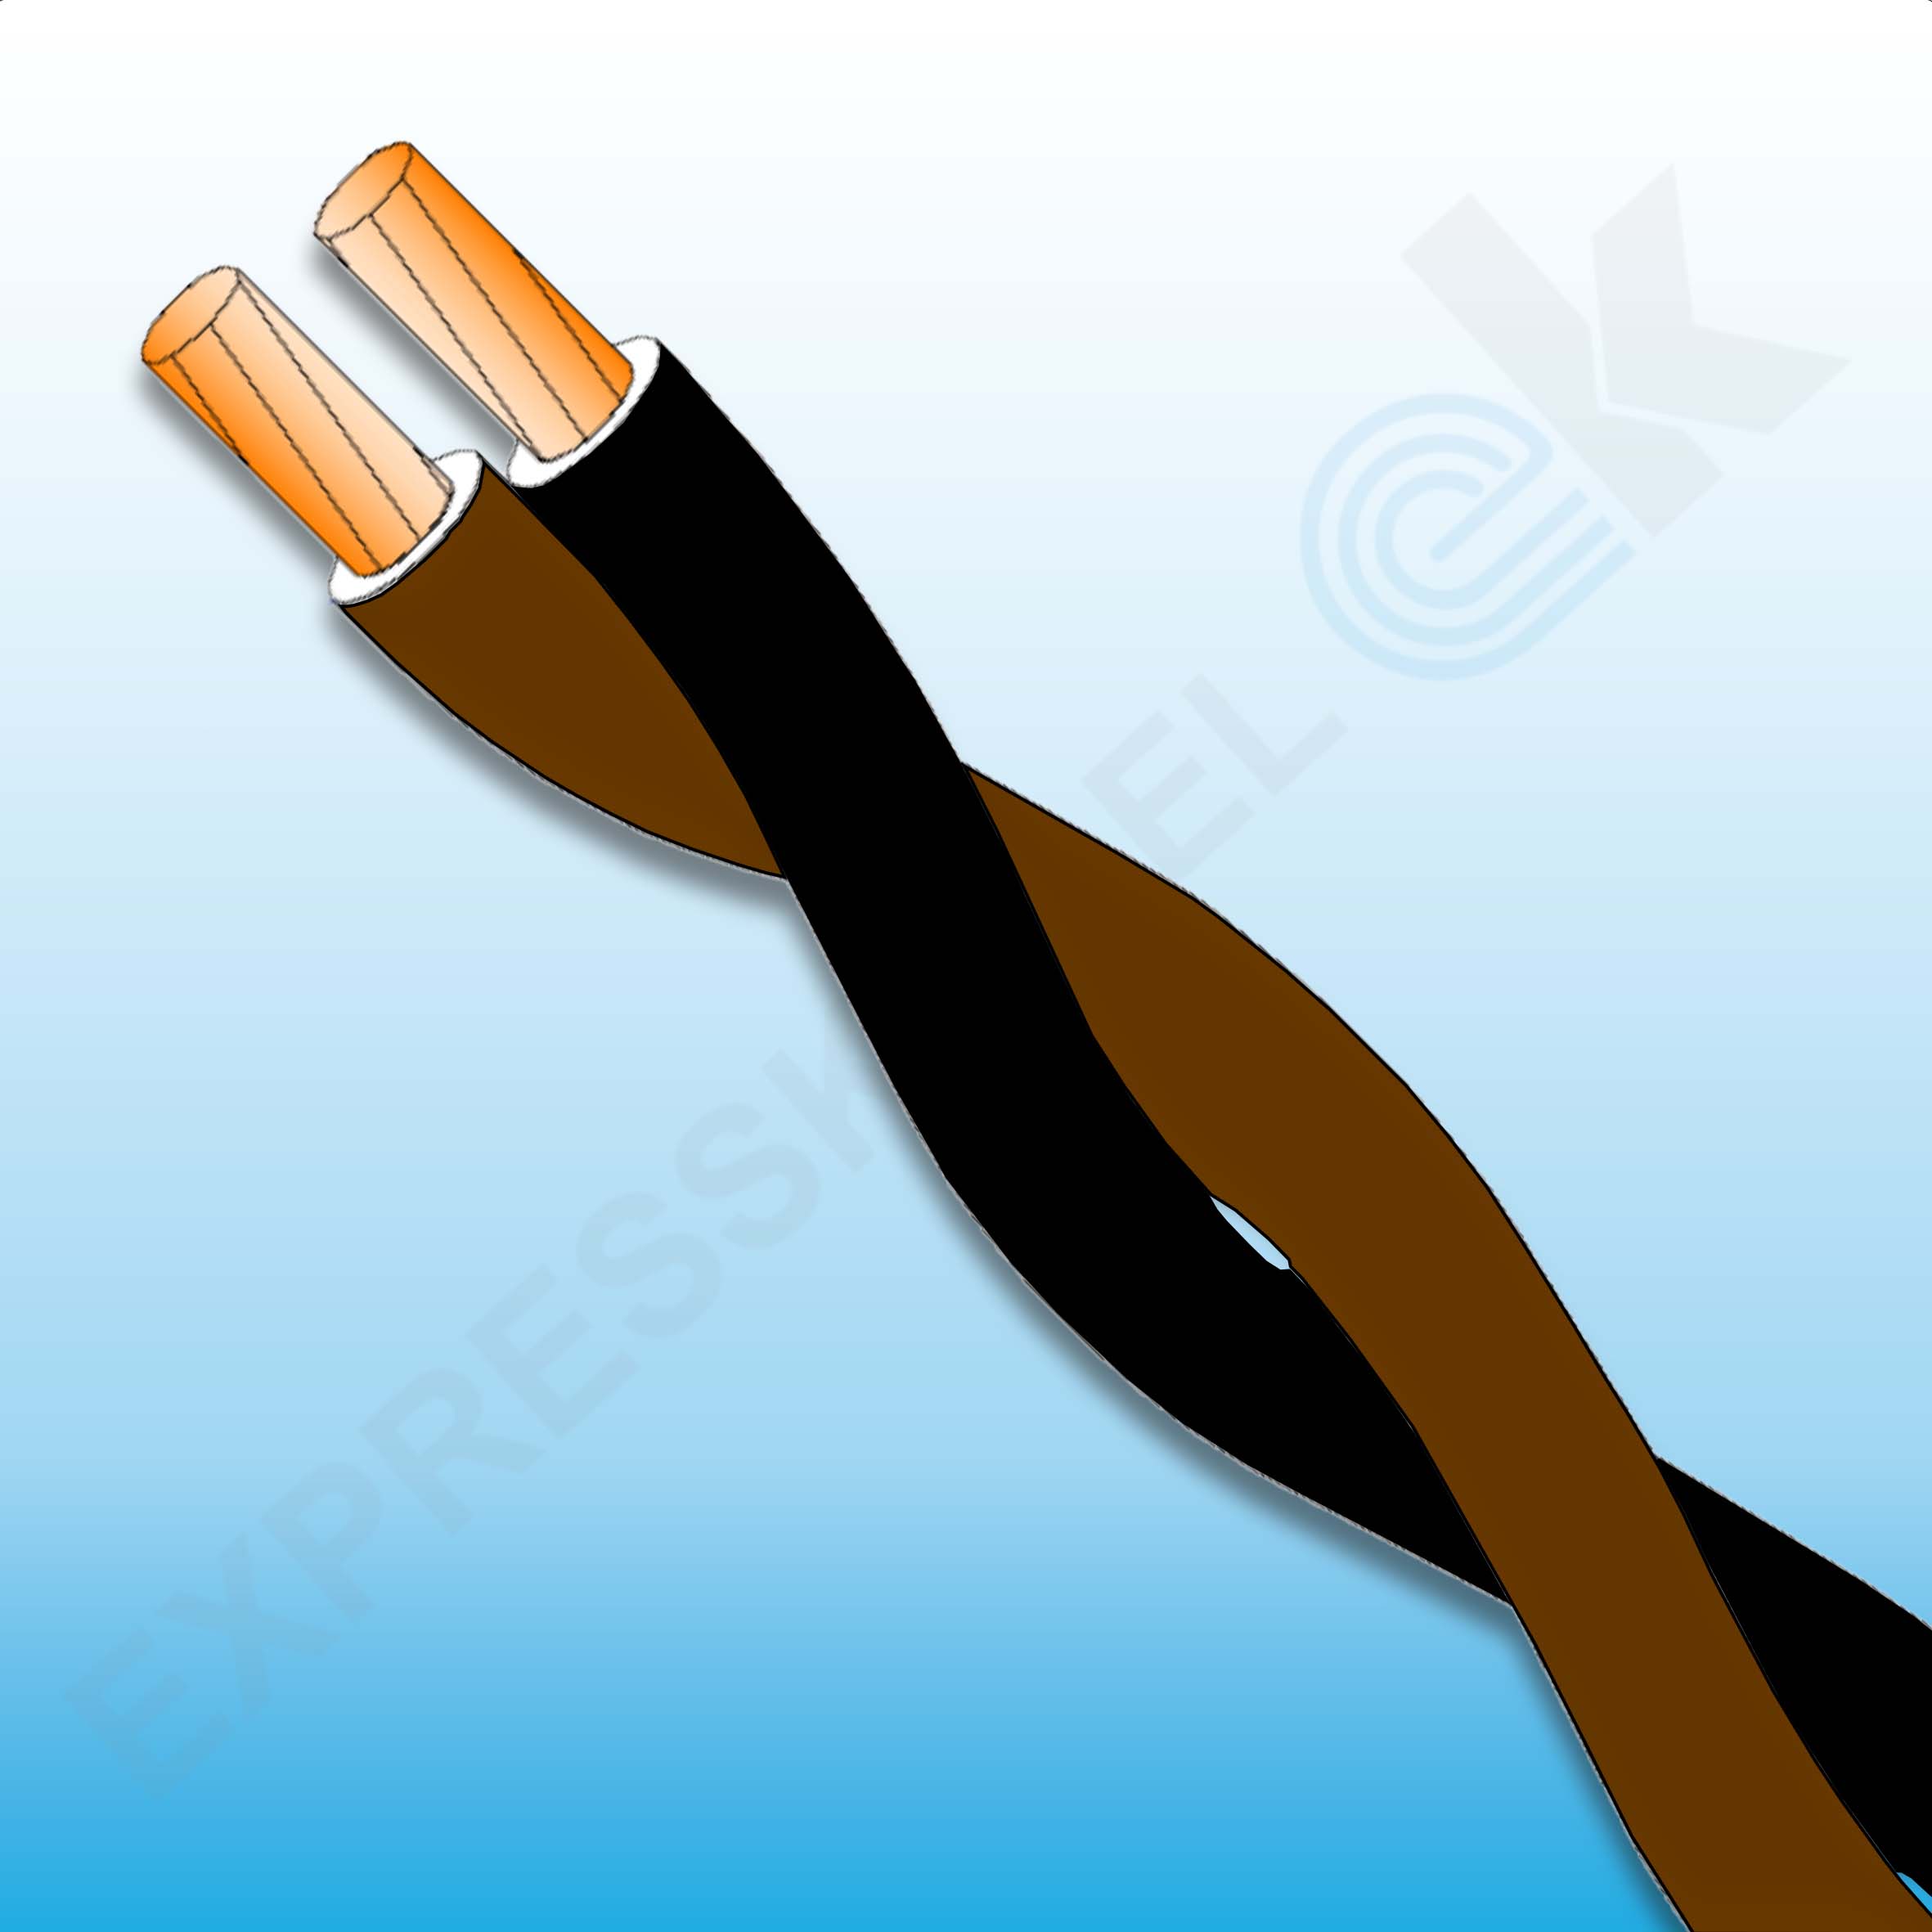 FLRY-A 2x0.35mm² twisted automotive cable - Express Kabel GmbH